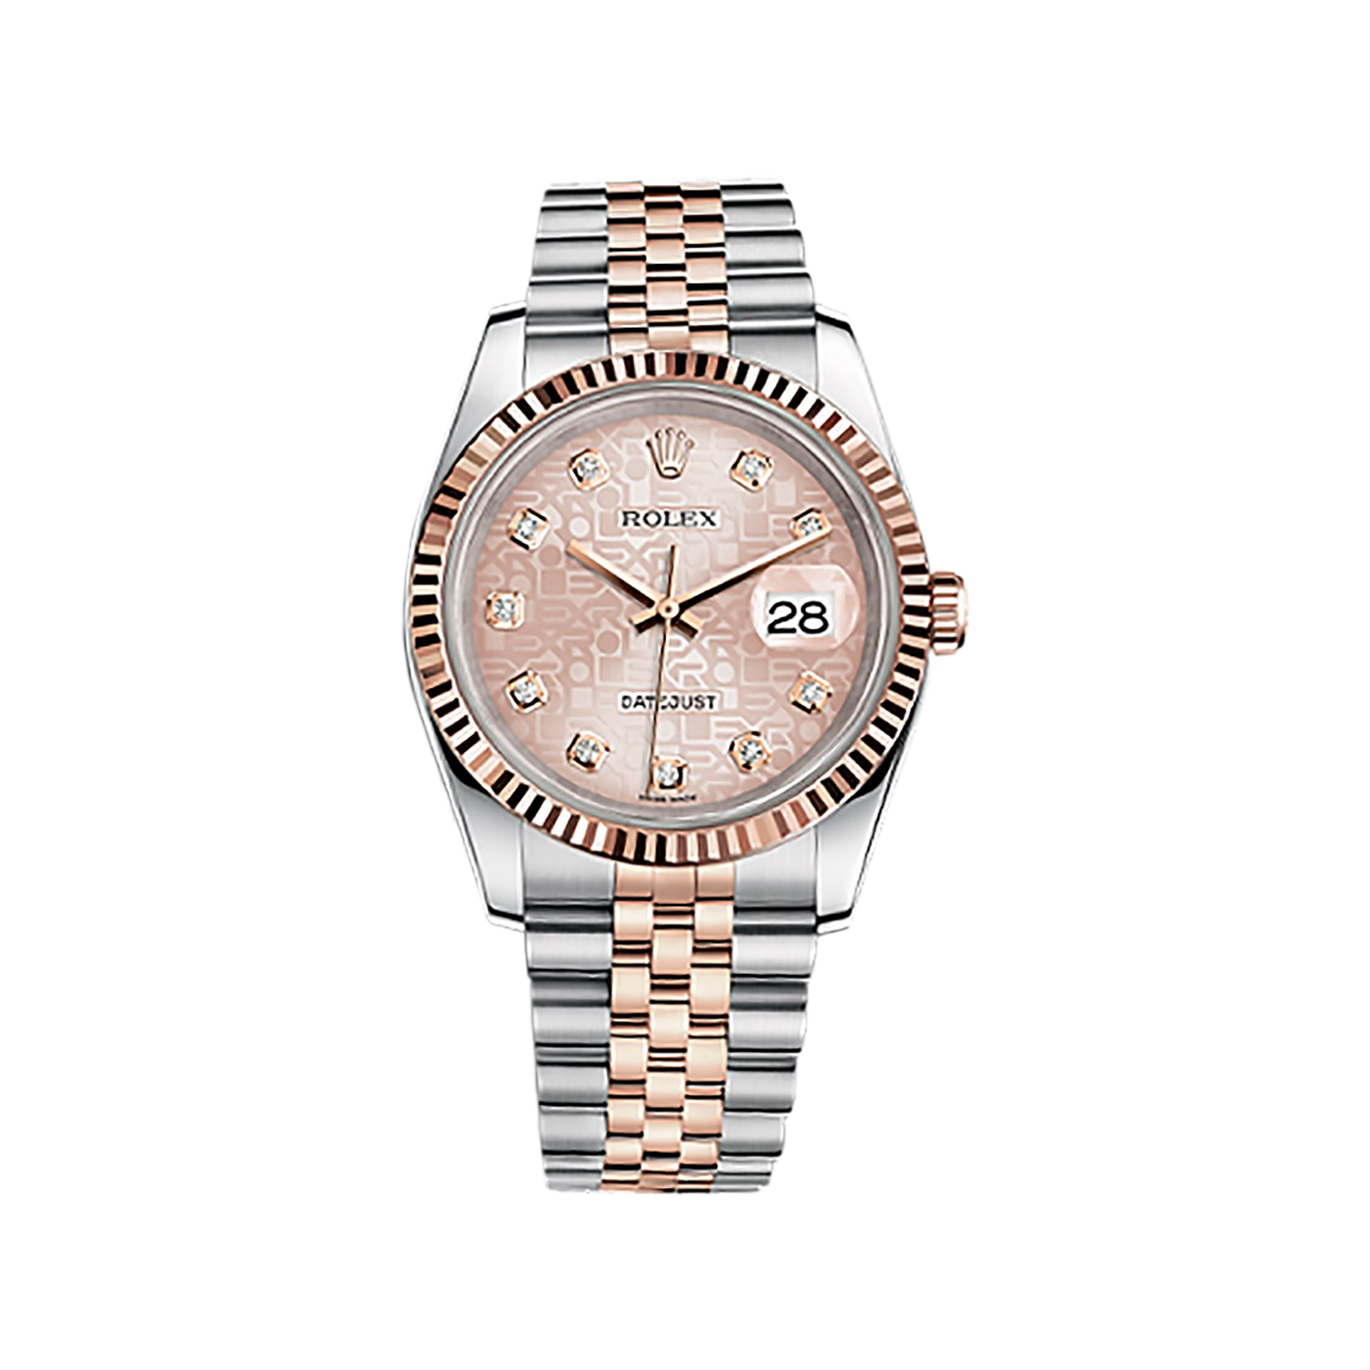 Datejust 36 116231 Rose Gold & Stainless Steel Watch (Pink Jubilee Design Set with Diamonds) - Click Image to Close